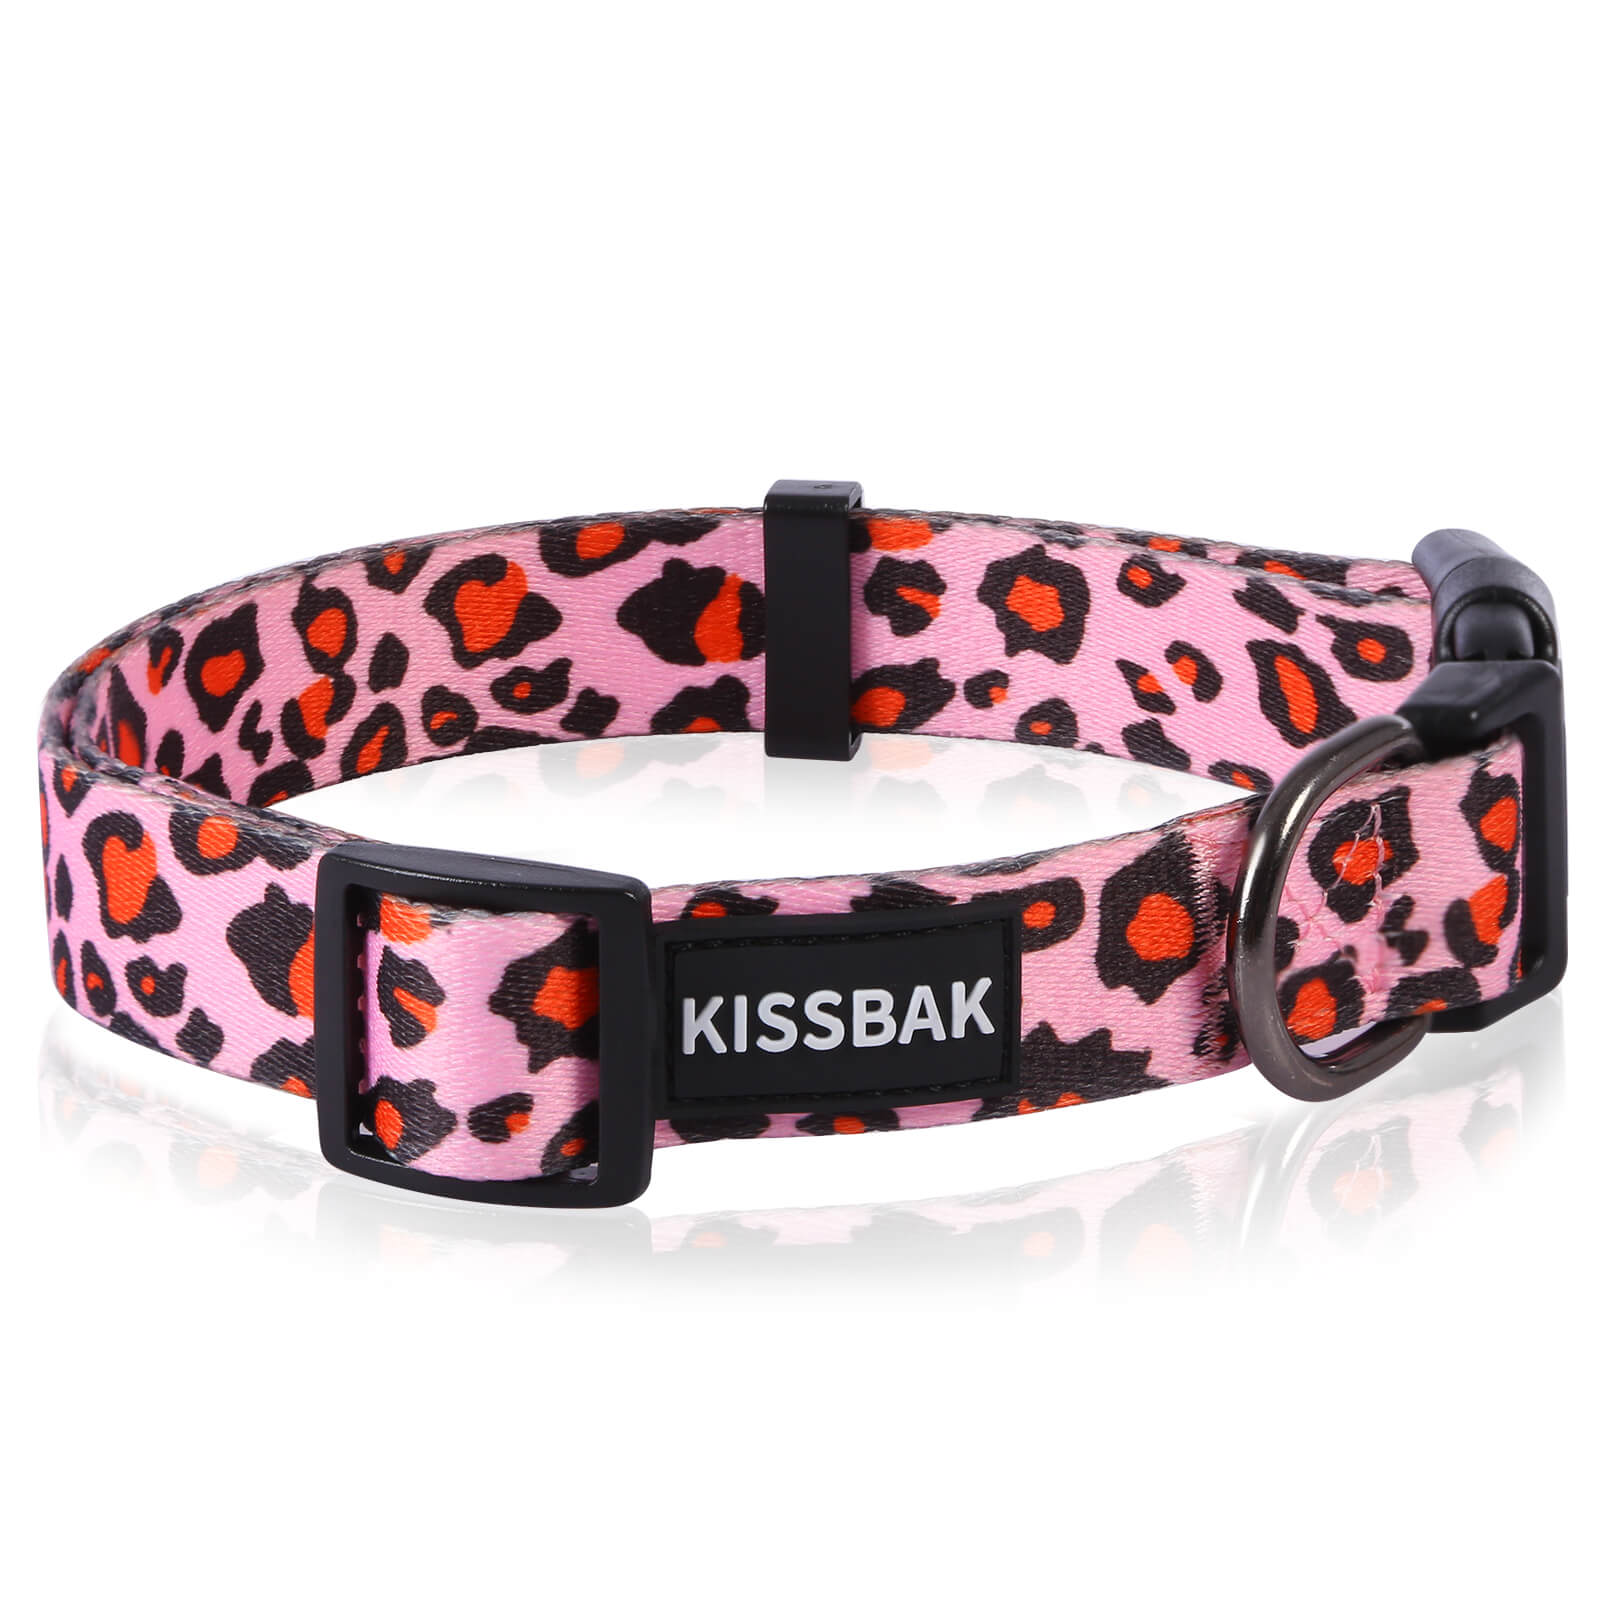 Lucky Love Dog collars comfortable, Soft, cute Female Dog collar for Small  Medium Large Dogs - SOcO, XS